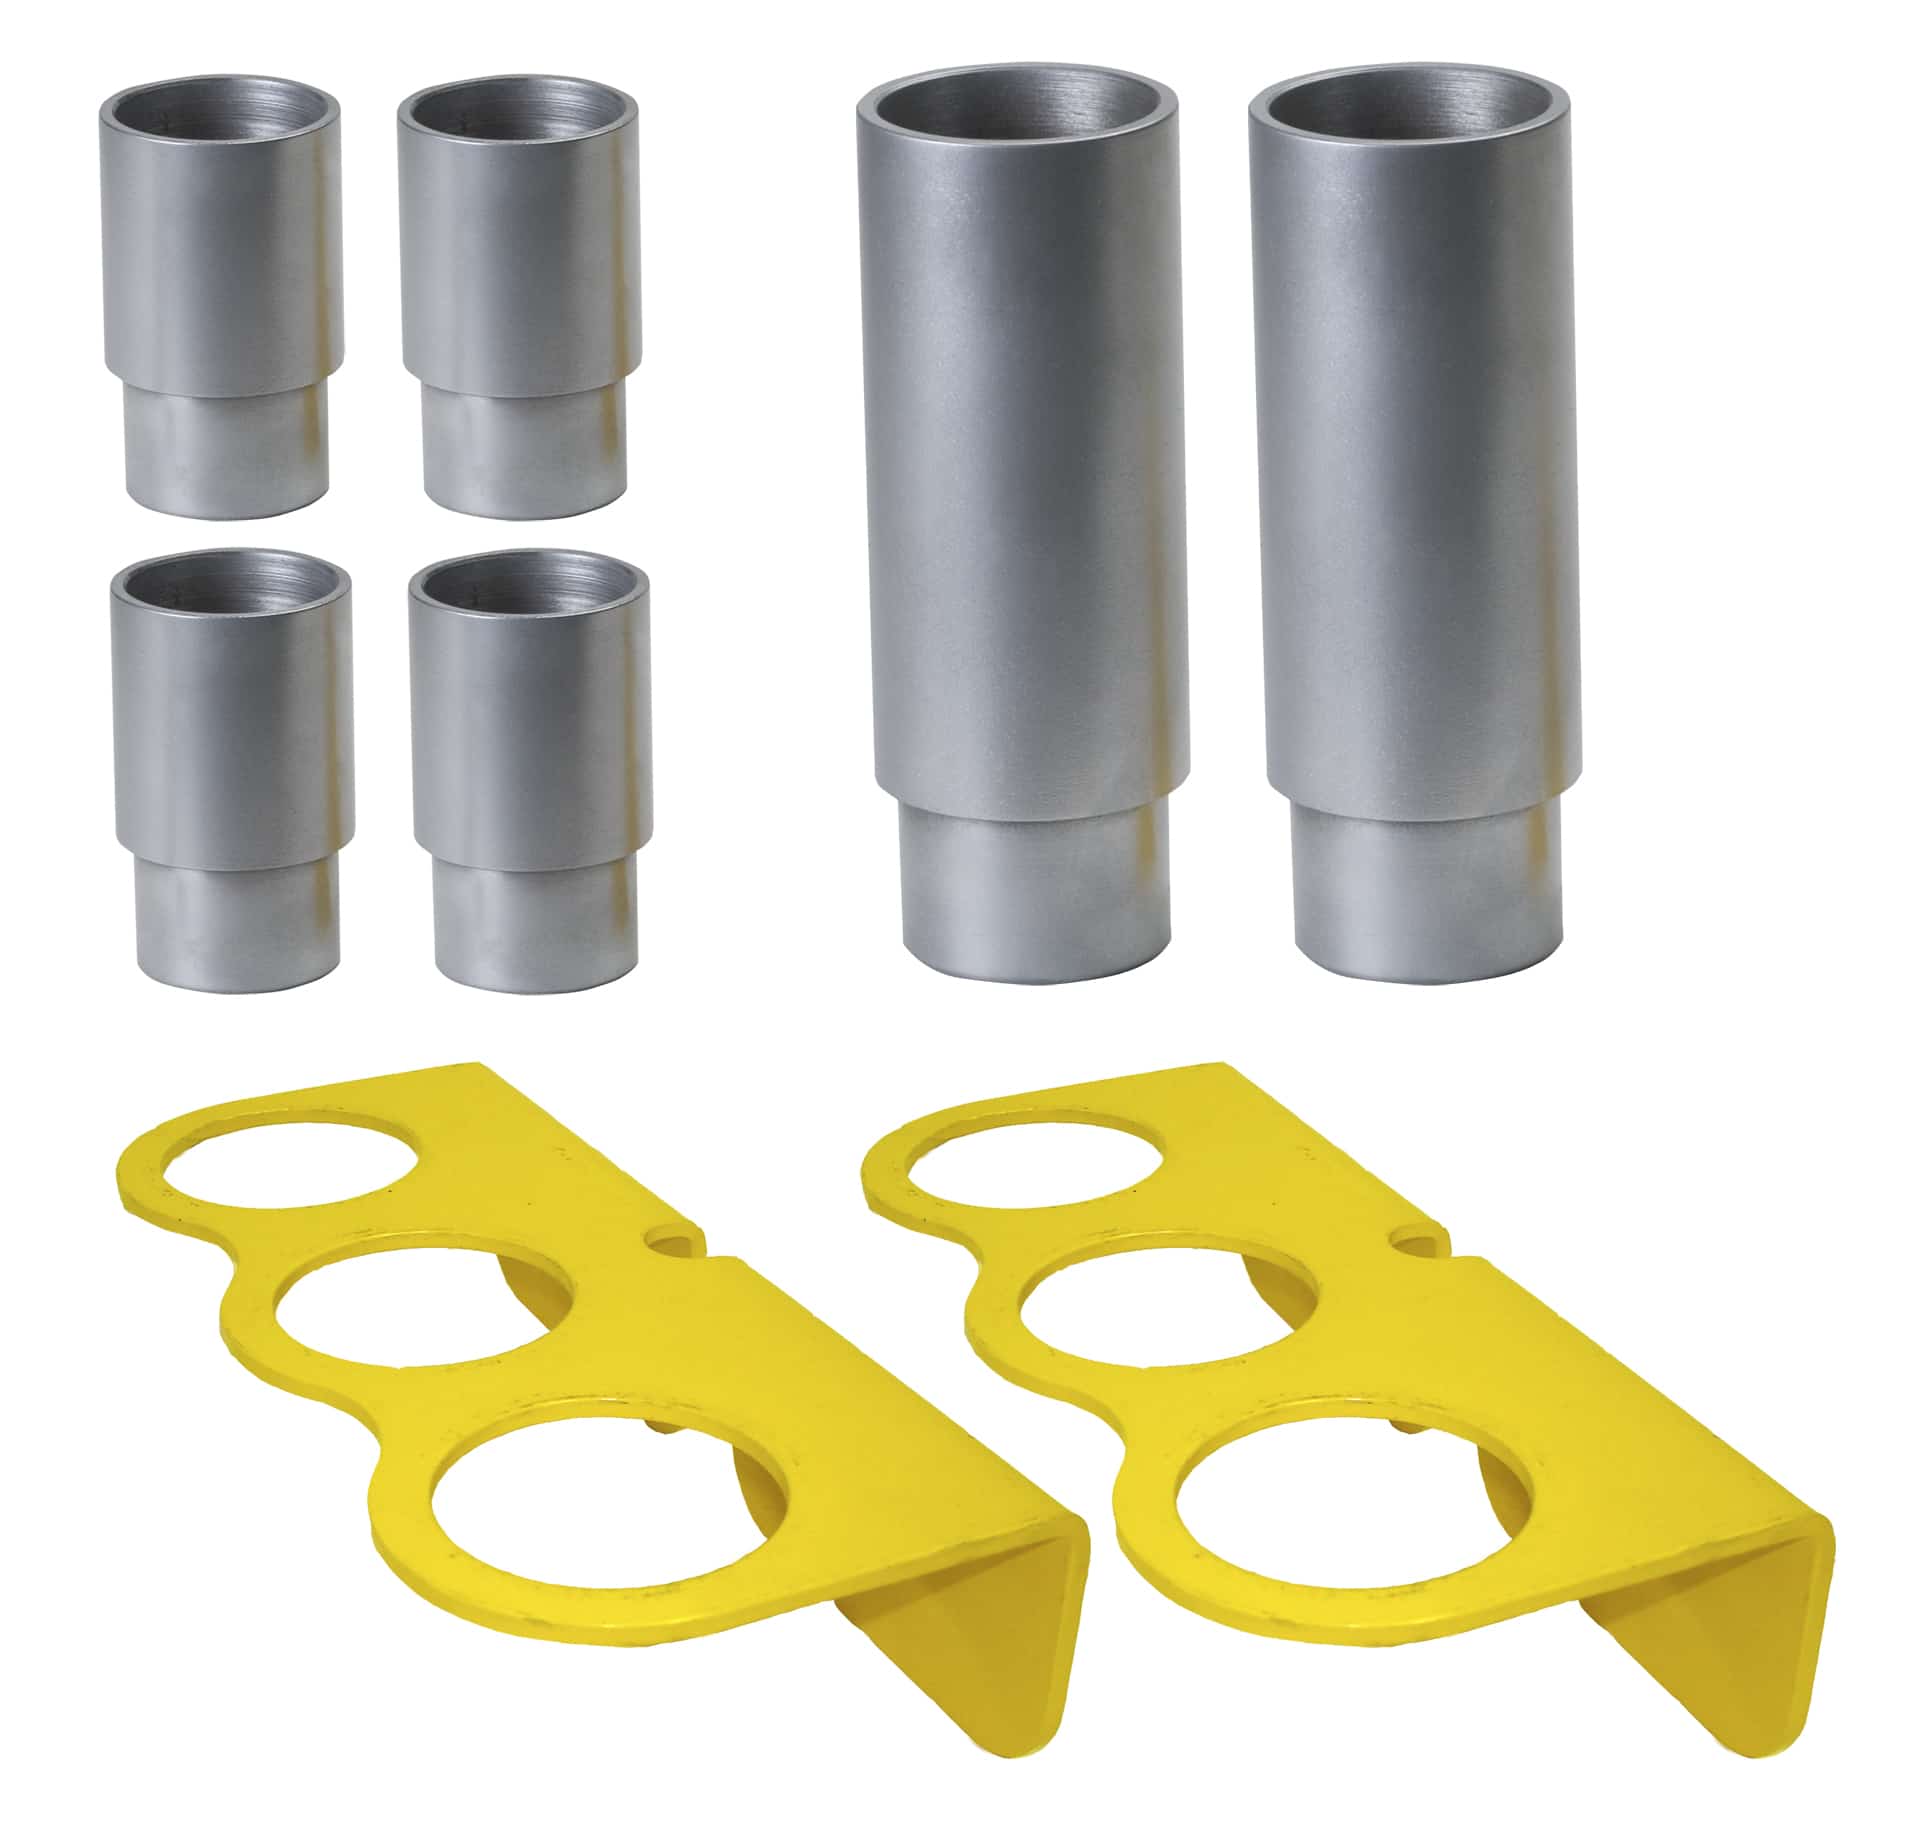 Challenger Lifts - STACK ADAPTER KIT FOR 10K AND 12K 2-POST LIFTS -  WLP-10315